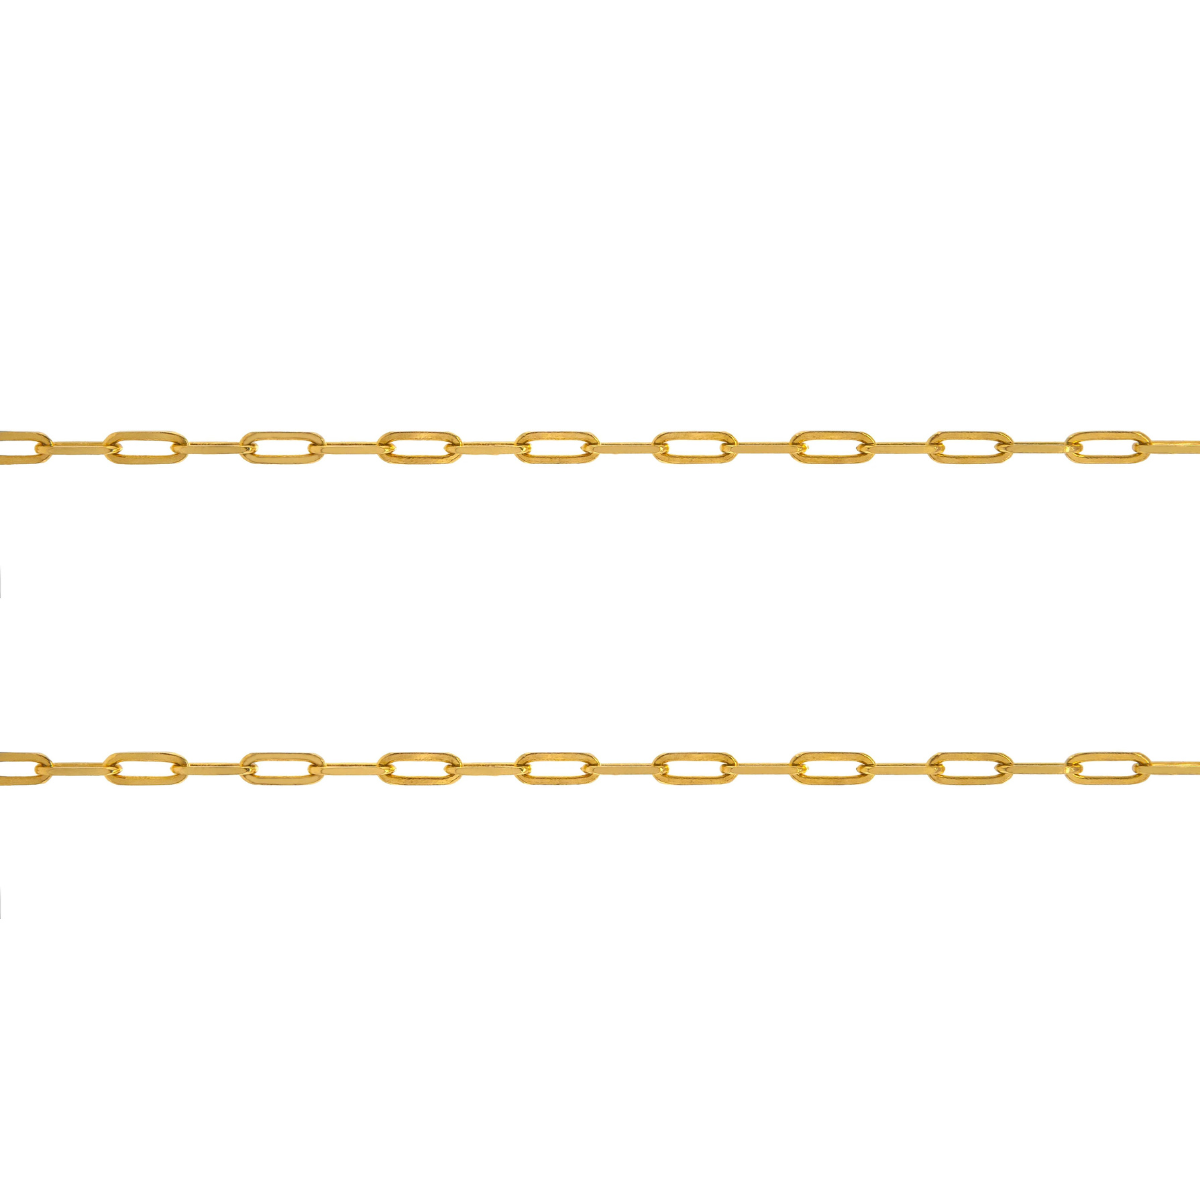 Bridget King Large Long Link Chain 34" in 14k Yellow Gold